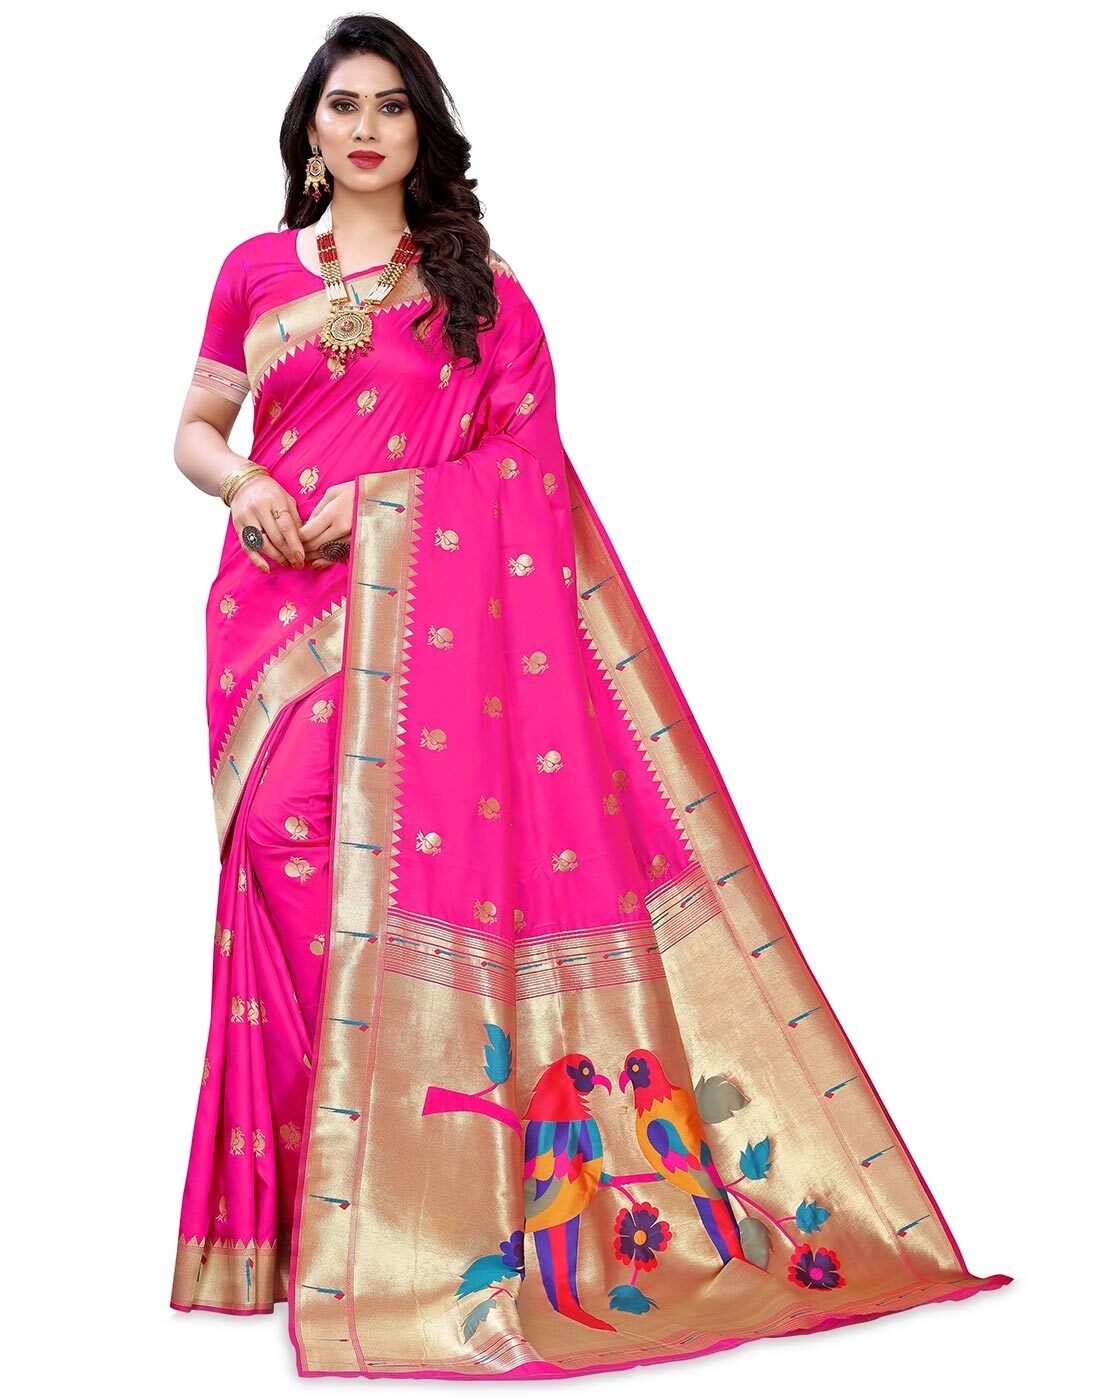 Png Imges Free Download - Model Wearing Saree Png Clipart (#523911) - PikPng